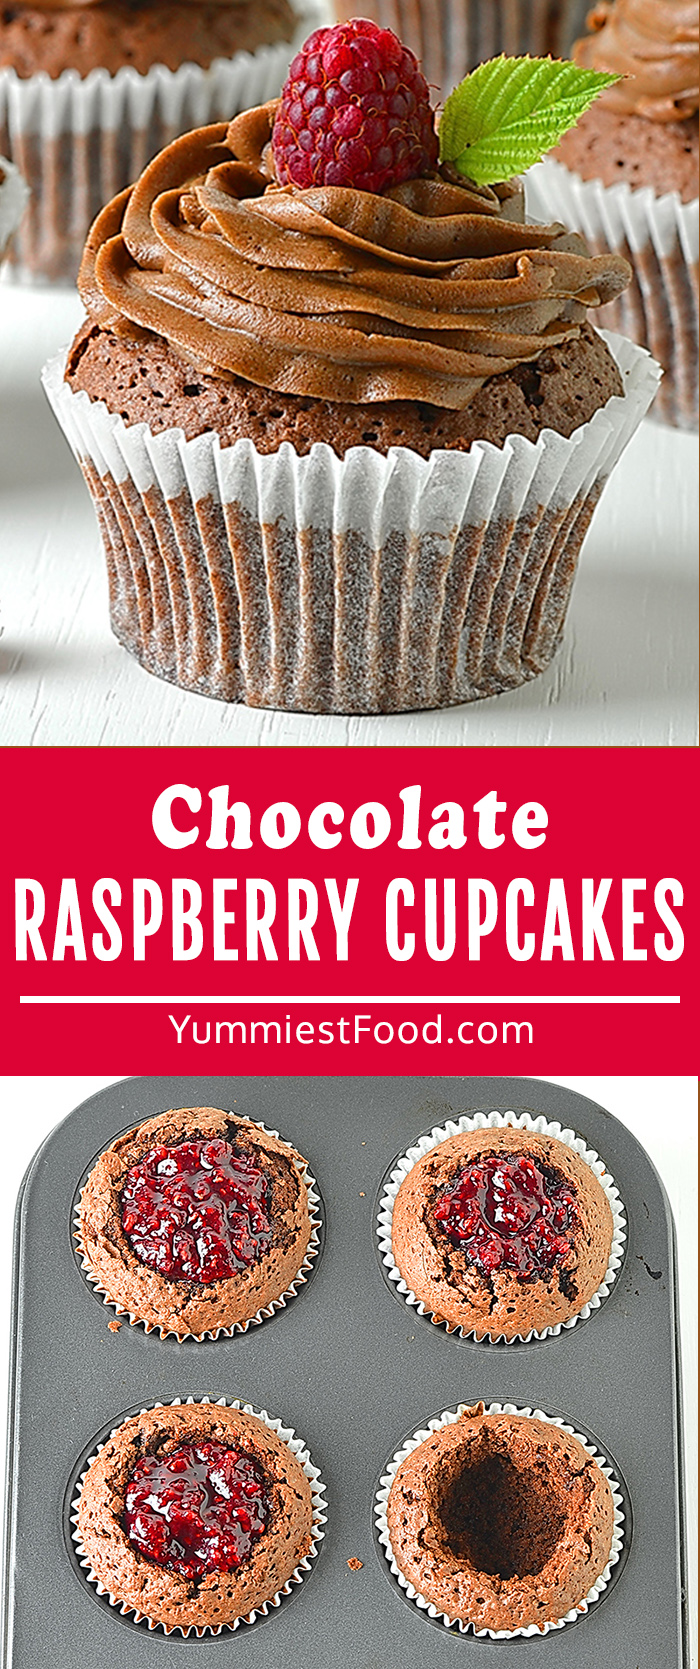 Decadent chocolate cupcakes stuffed with homemade raspberry filling and topped with chocolate buttercream frosting!